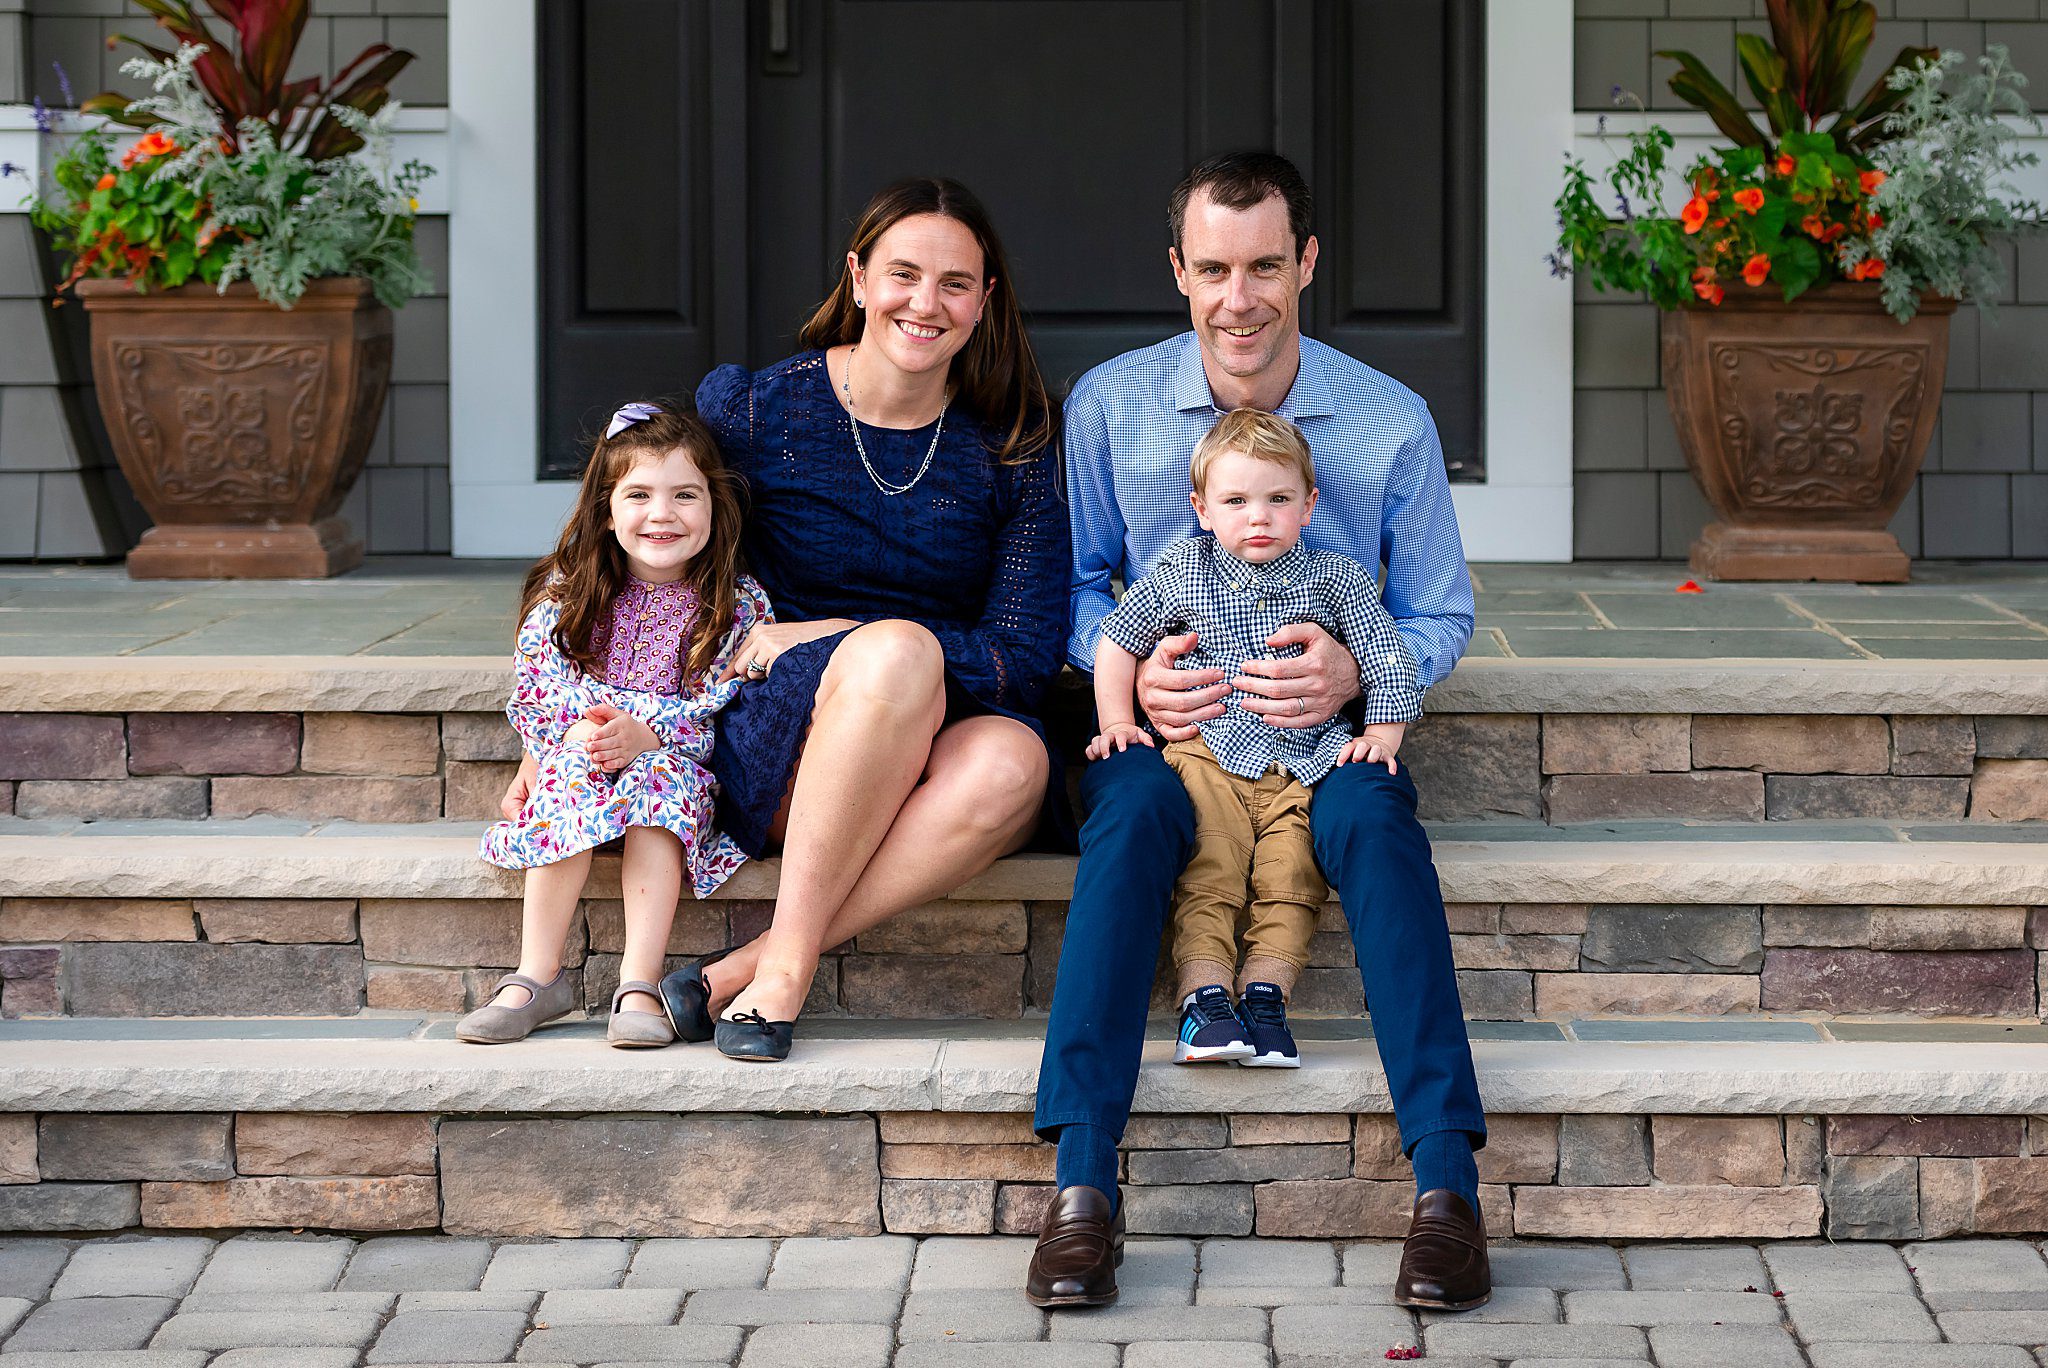 Rumson Brooklyn Family portraits in Fair Haven, New Jersey.